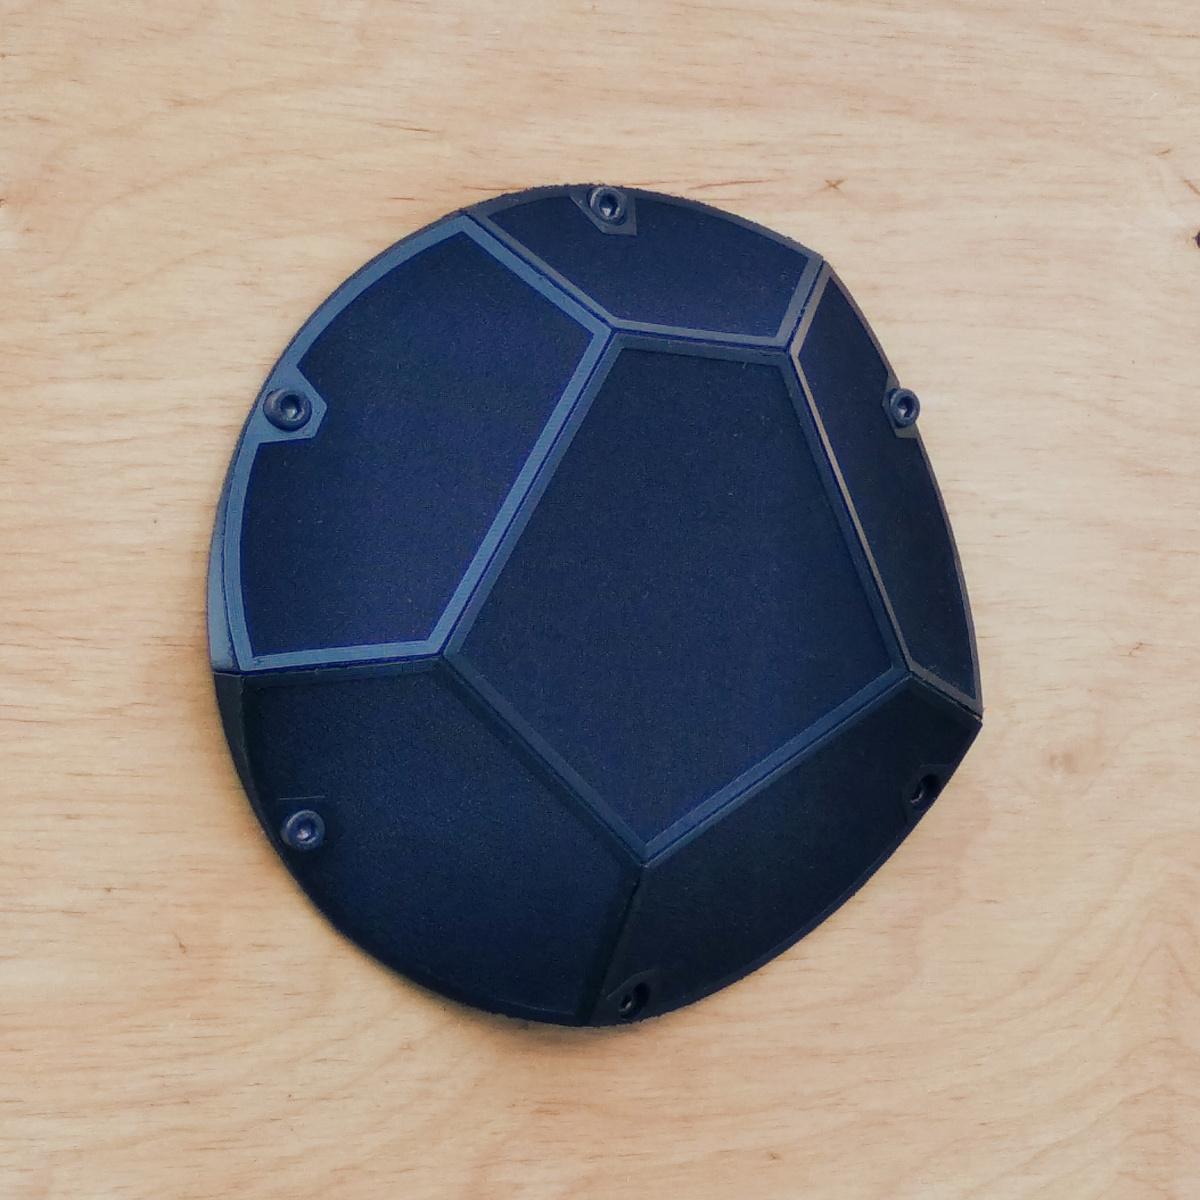 #3DPNSpeakerCover Print on fabric - Fold in place - Prusament PETG and audio fabric - 3d model